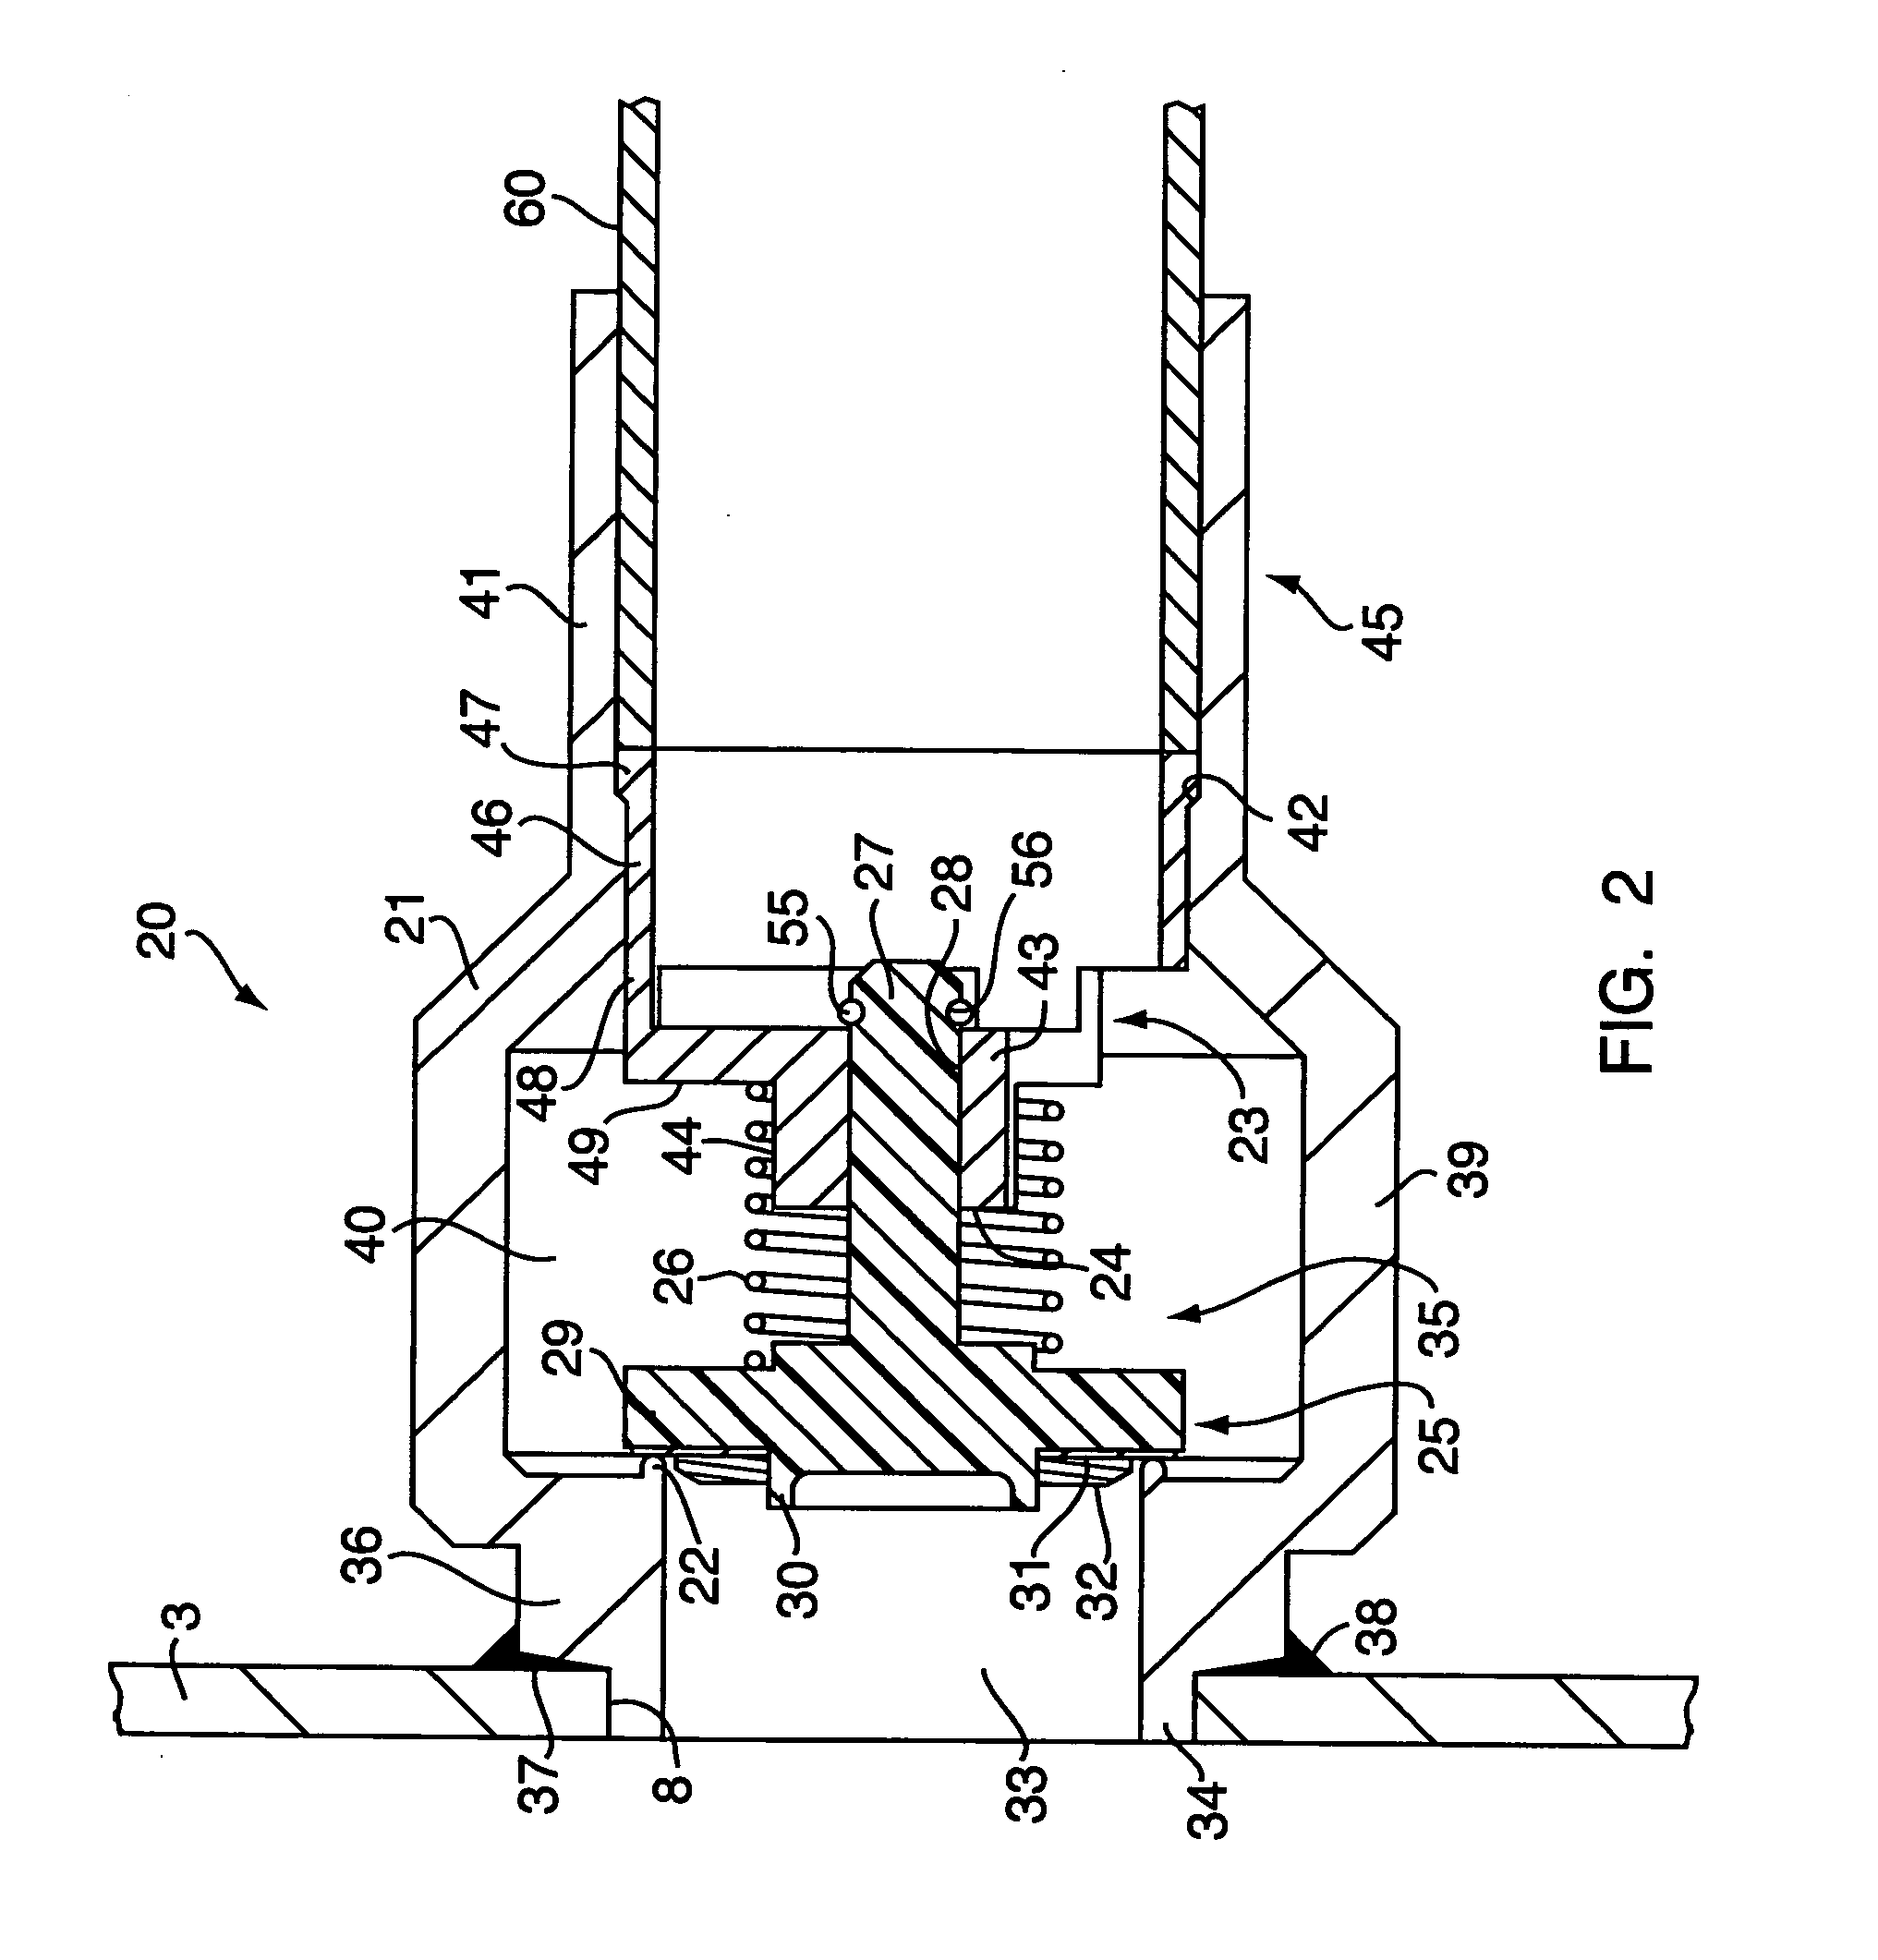 Discharge check valve assembly for use with hermetic scroll compressor